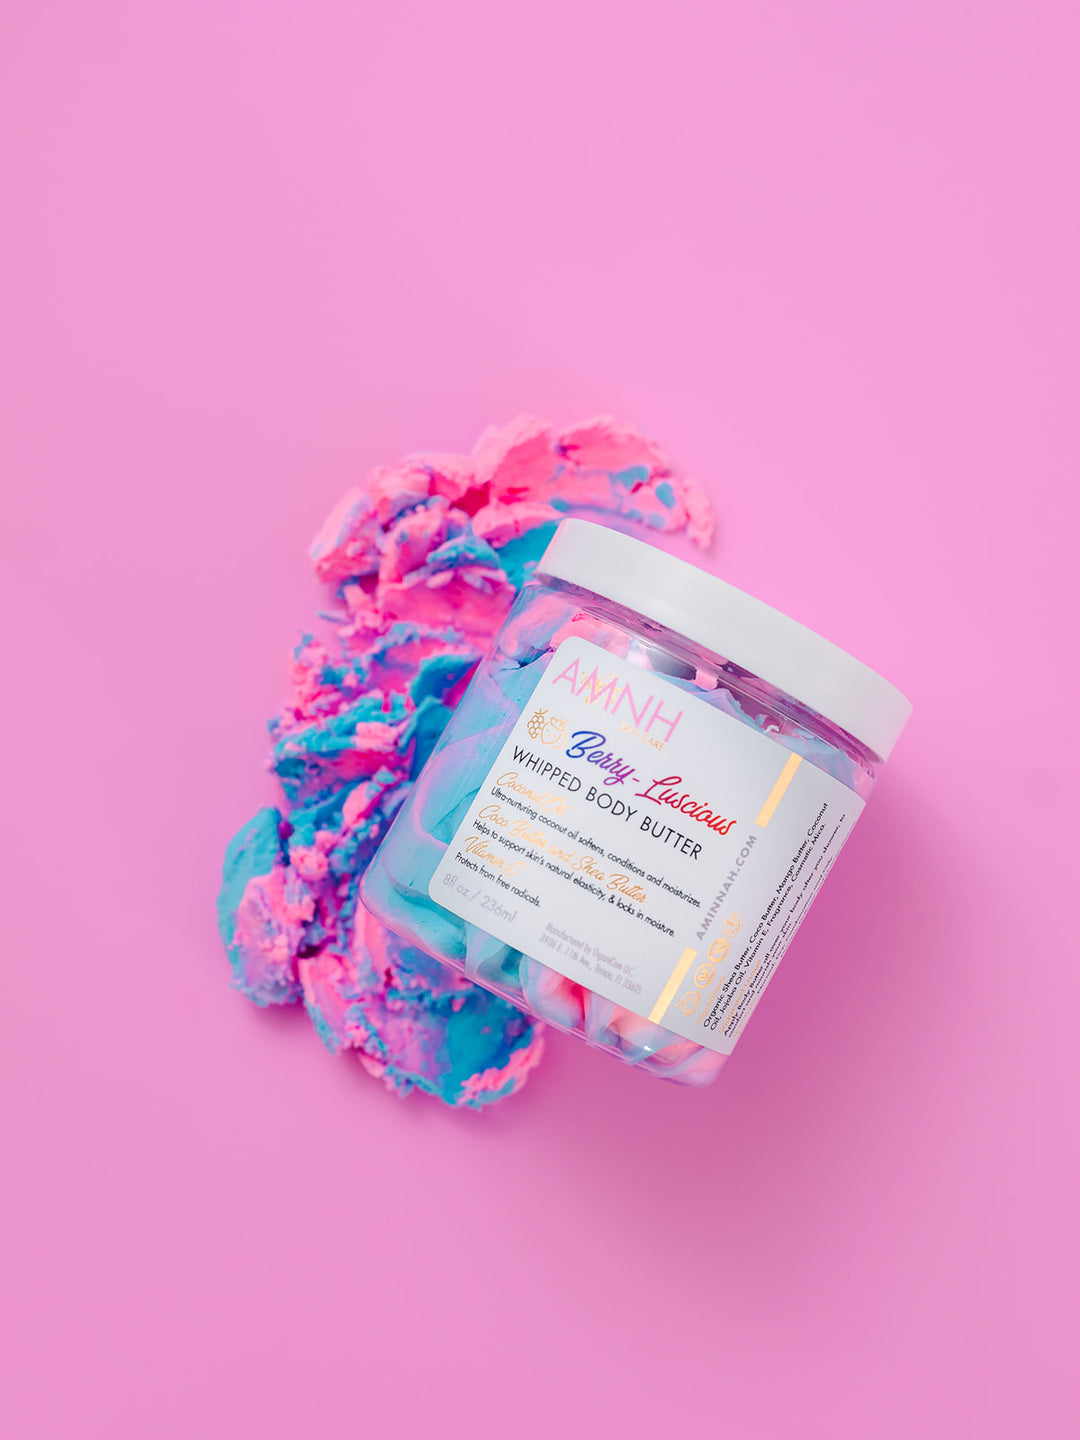 "Berry-licious" Whipped Body Butter